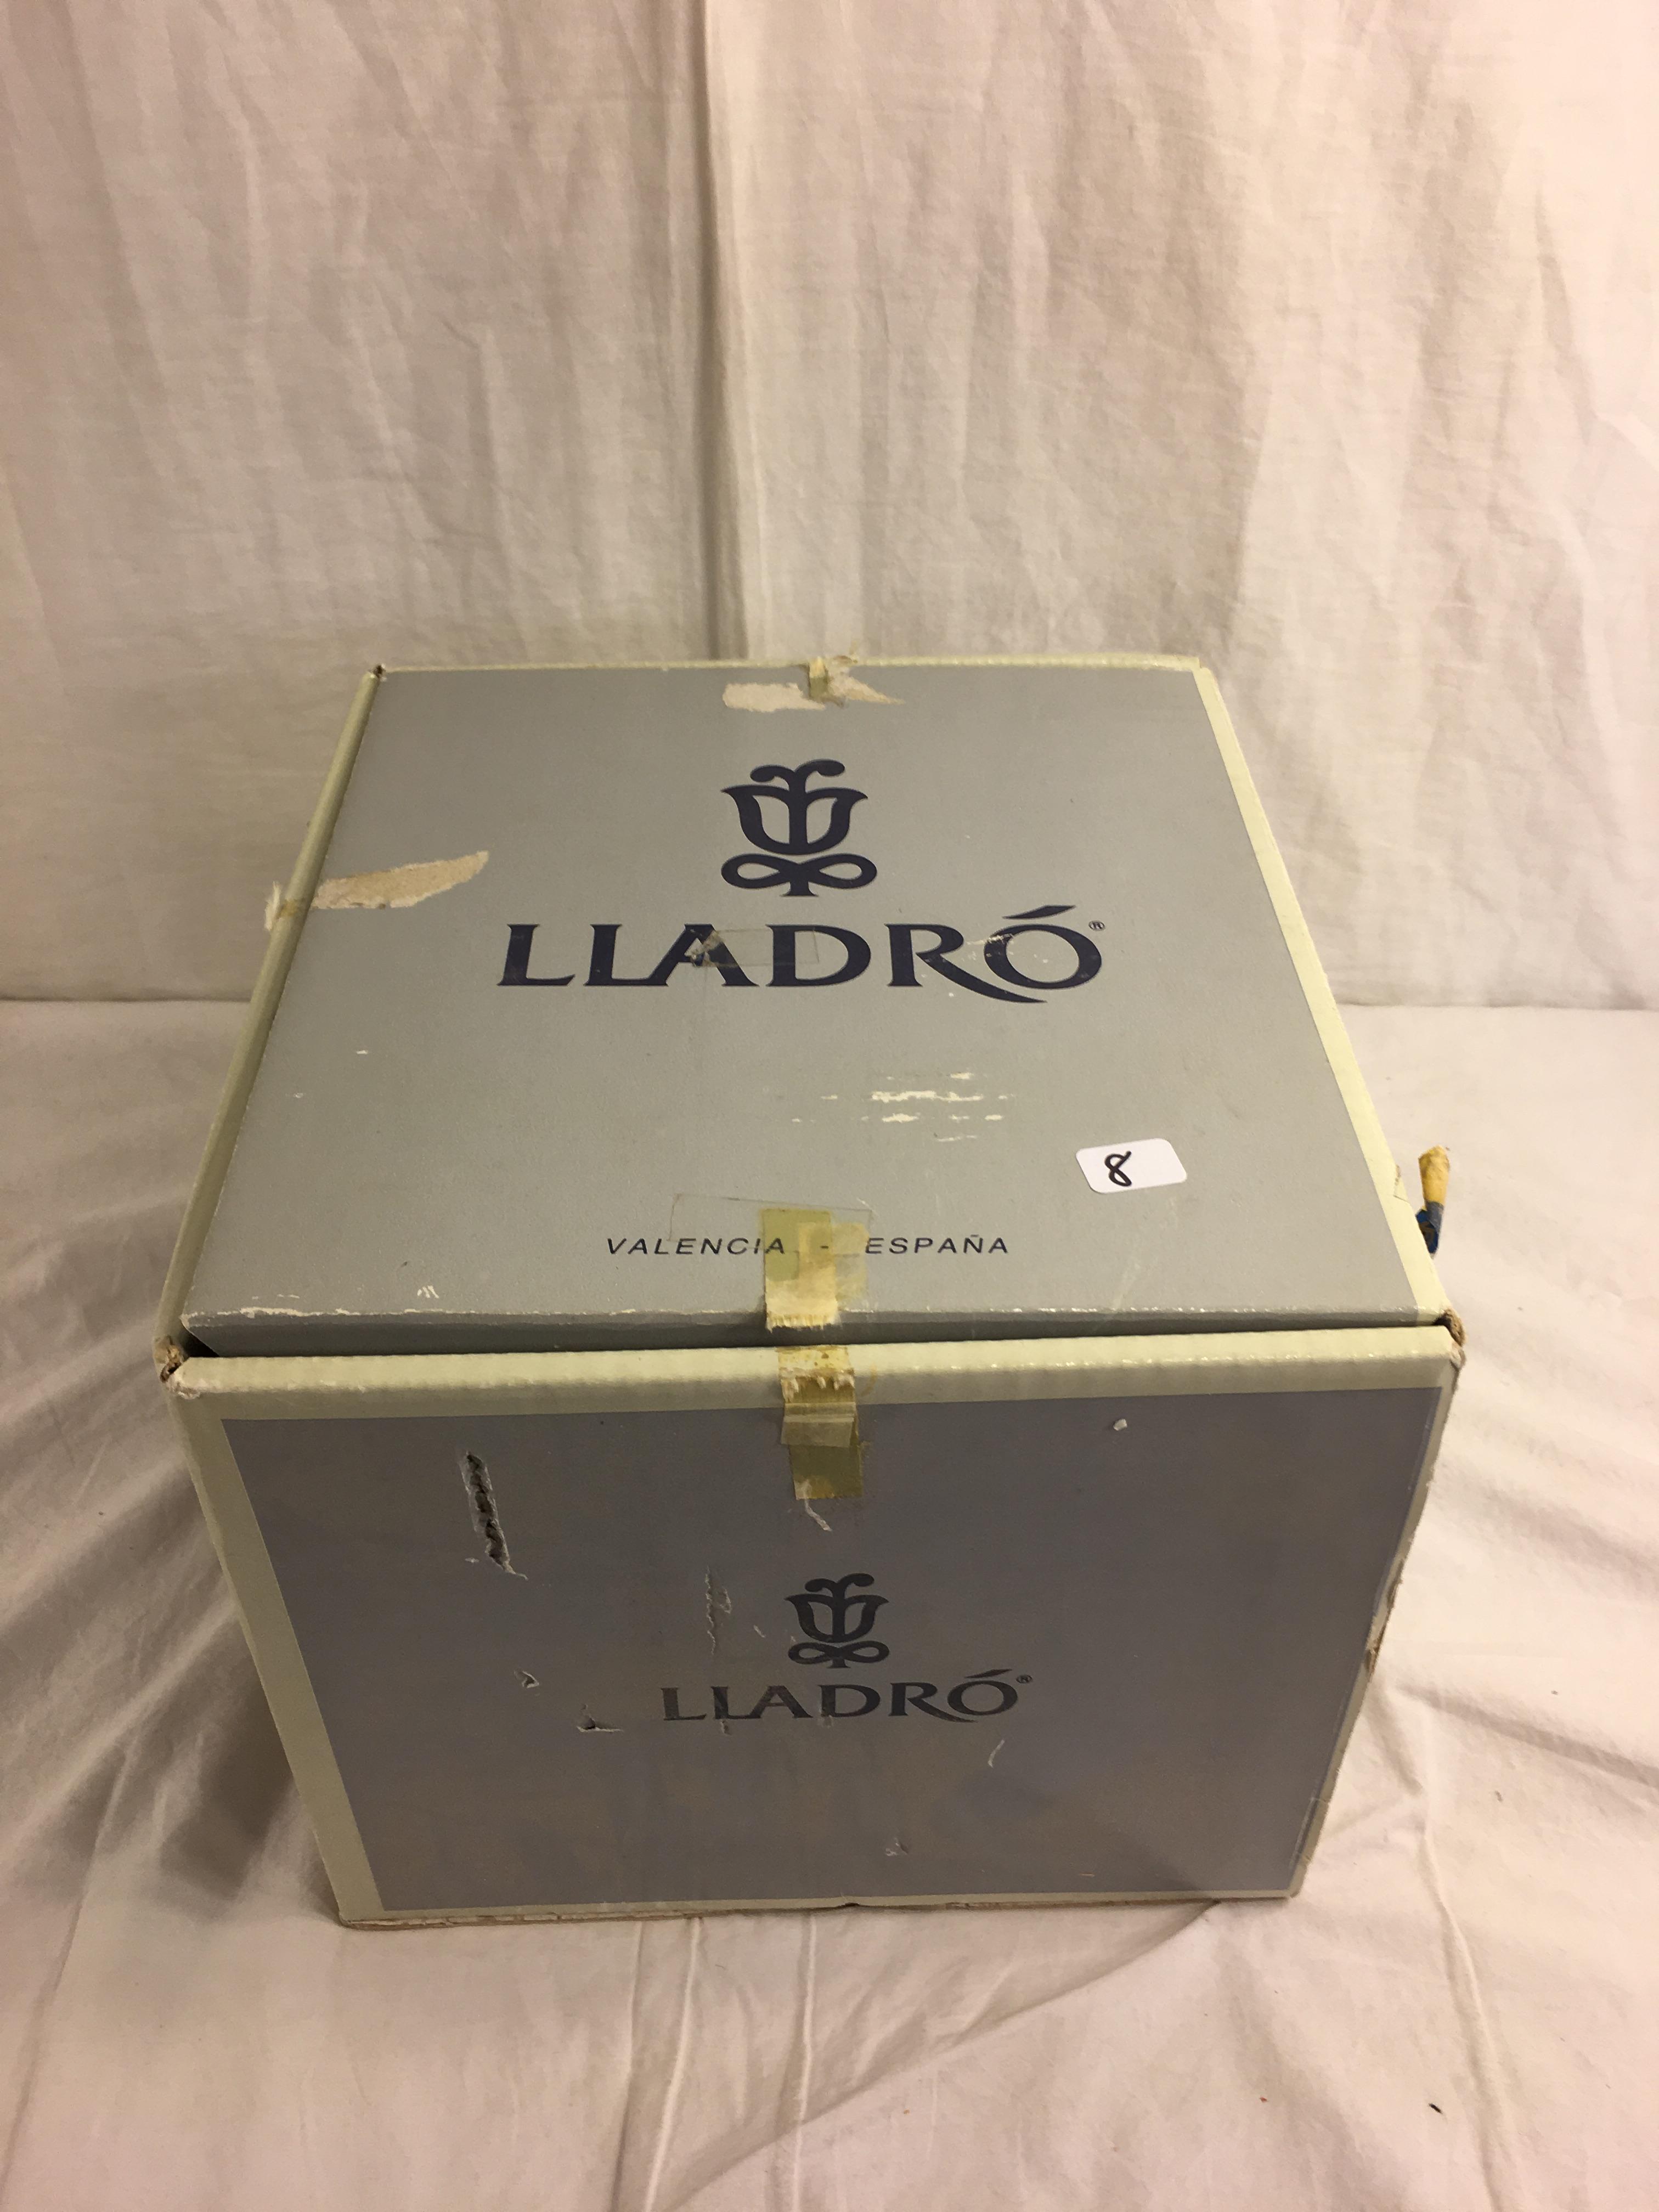 Collector Lladro "My Chores" 5782 Porcelain Figurine With Original Box Size:8x10'x9" Box